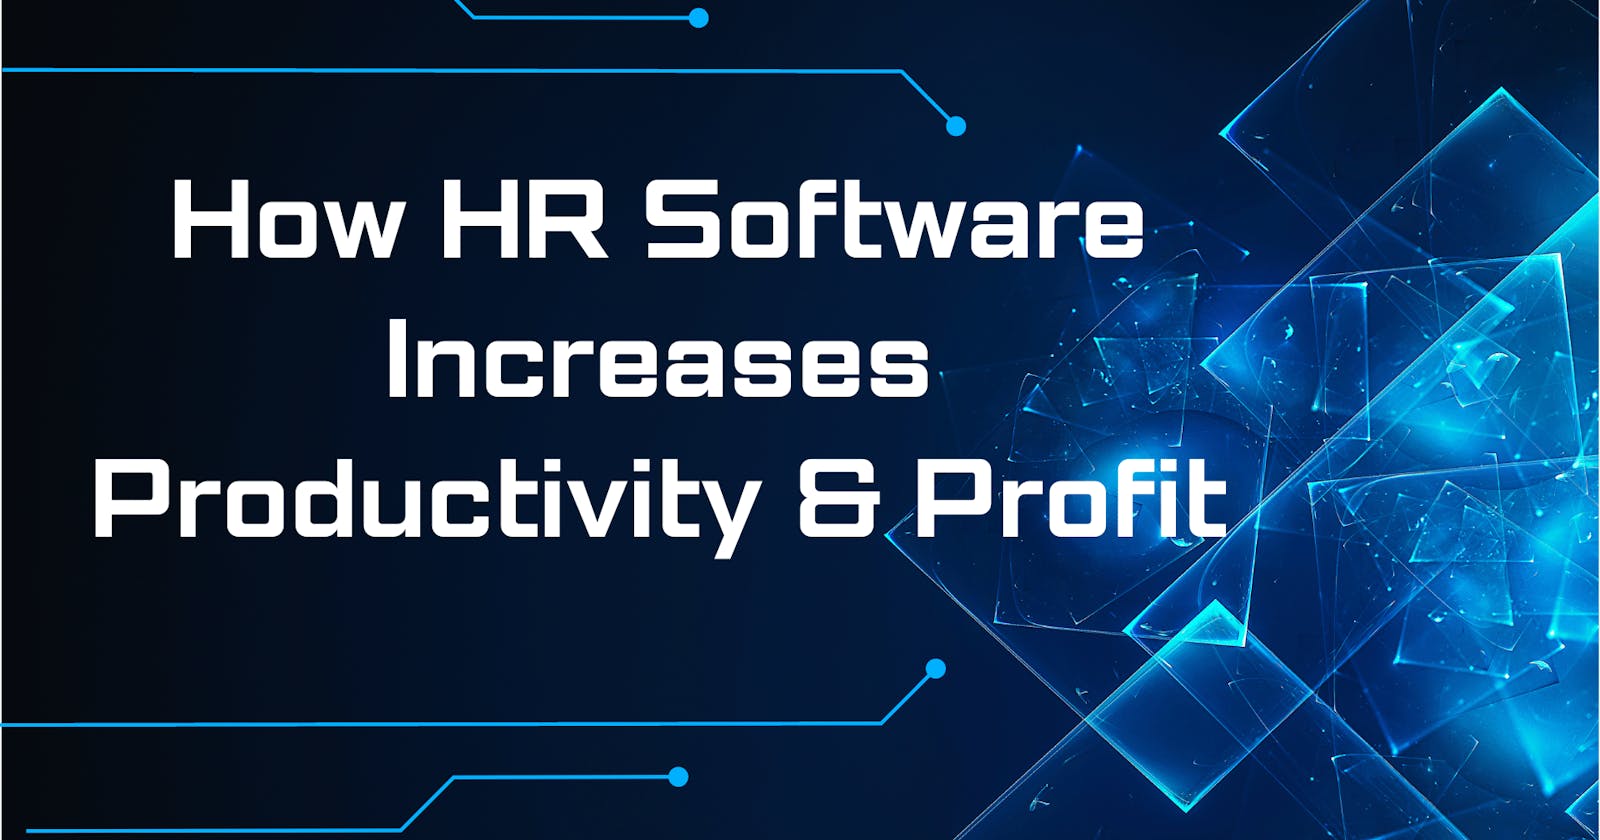 How HR Software Increases Productivity & Profit